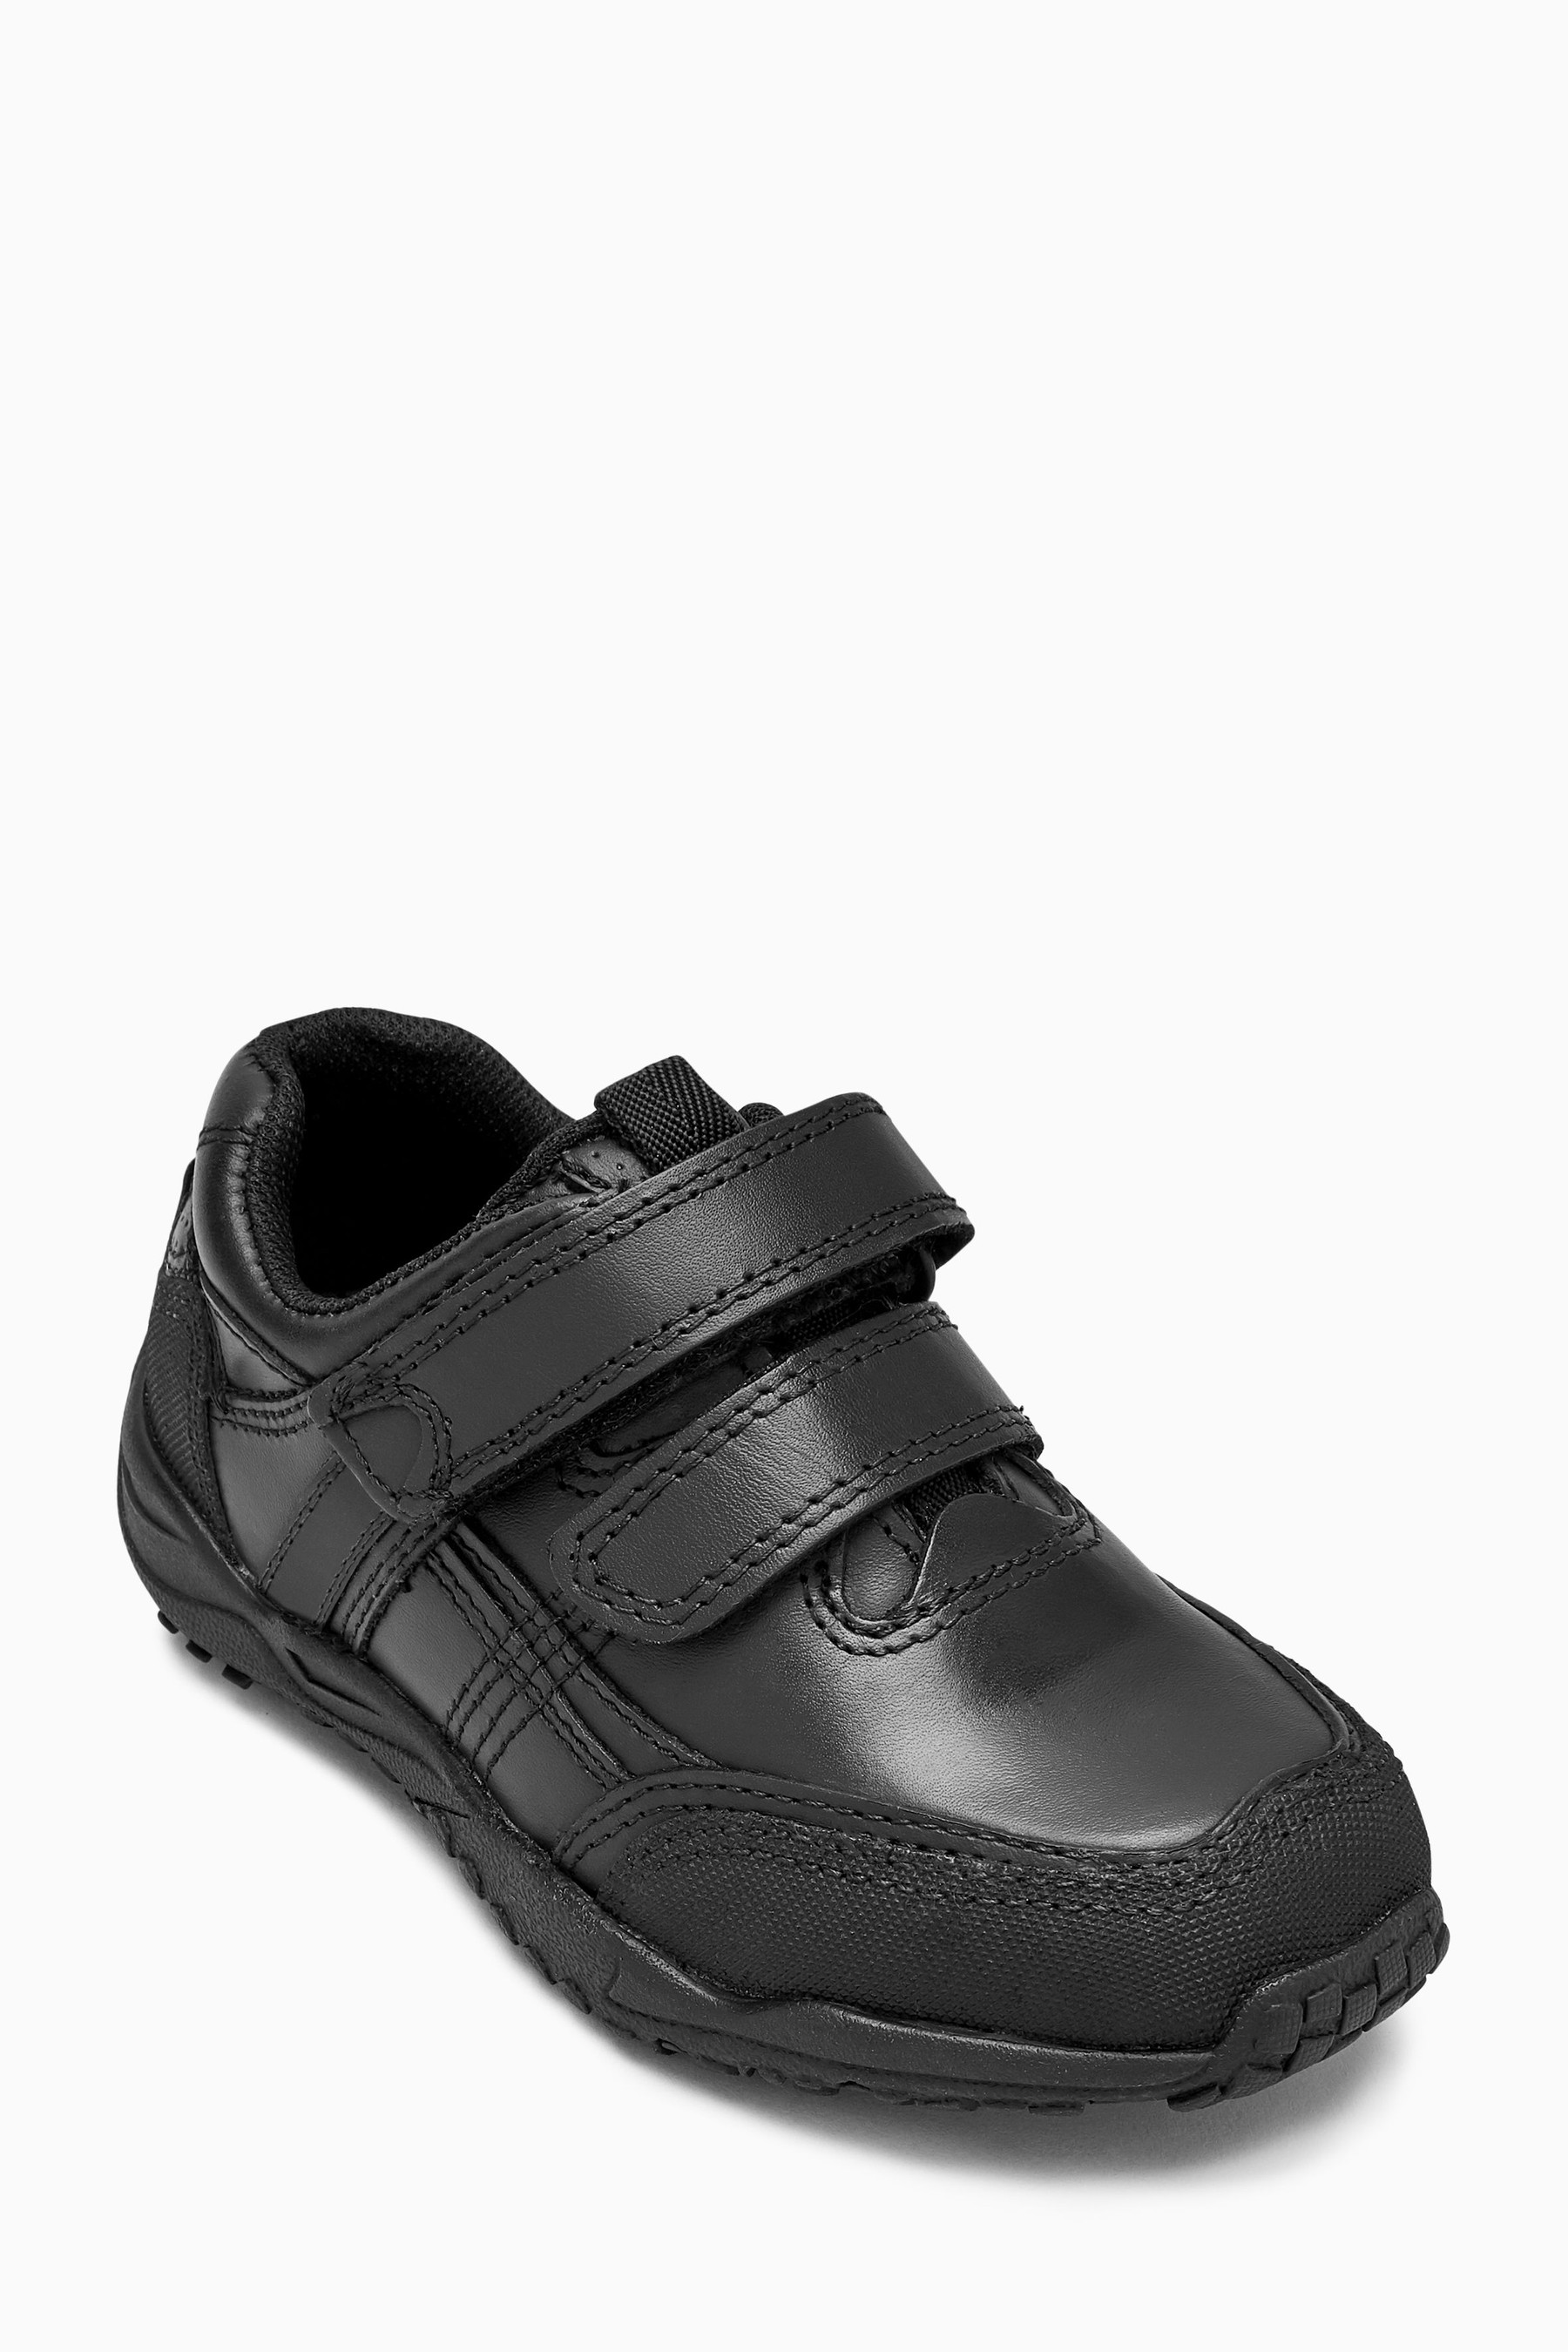 School Leather Double Strap Shoes Standard Fit (F)